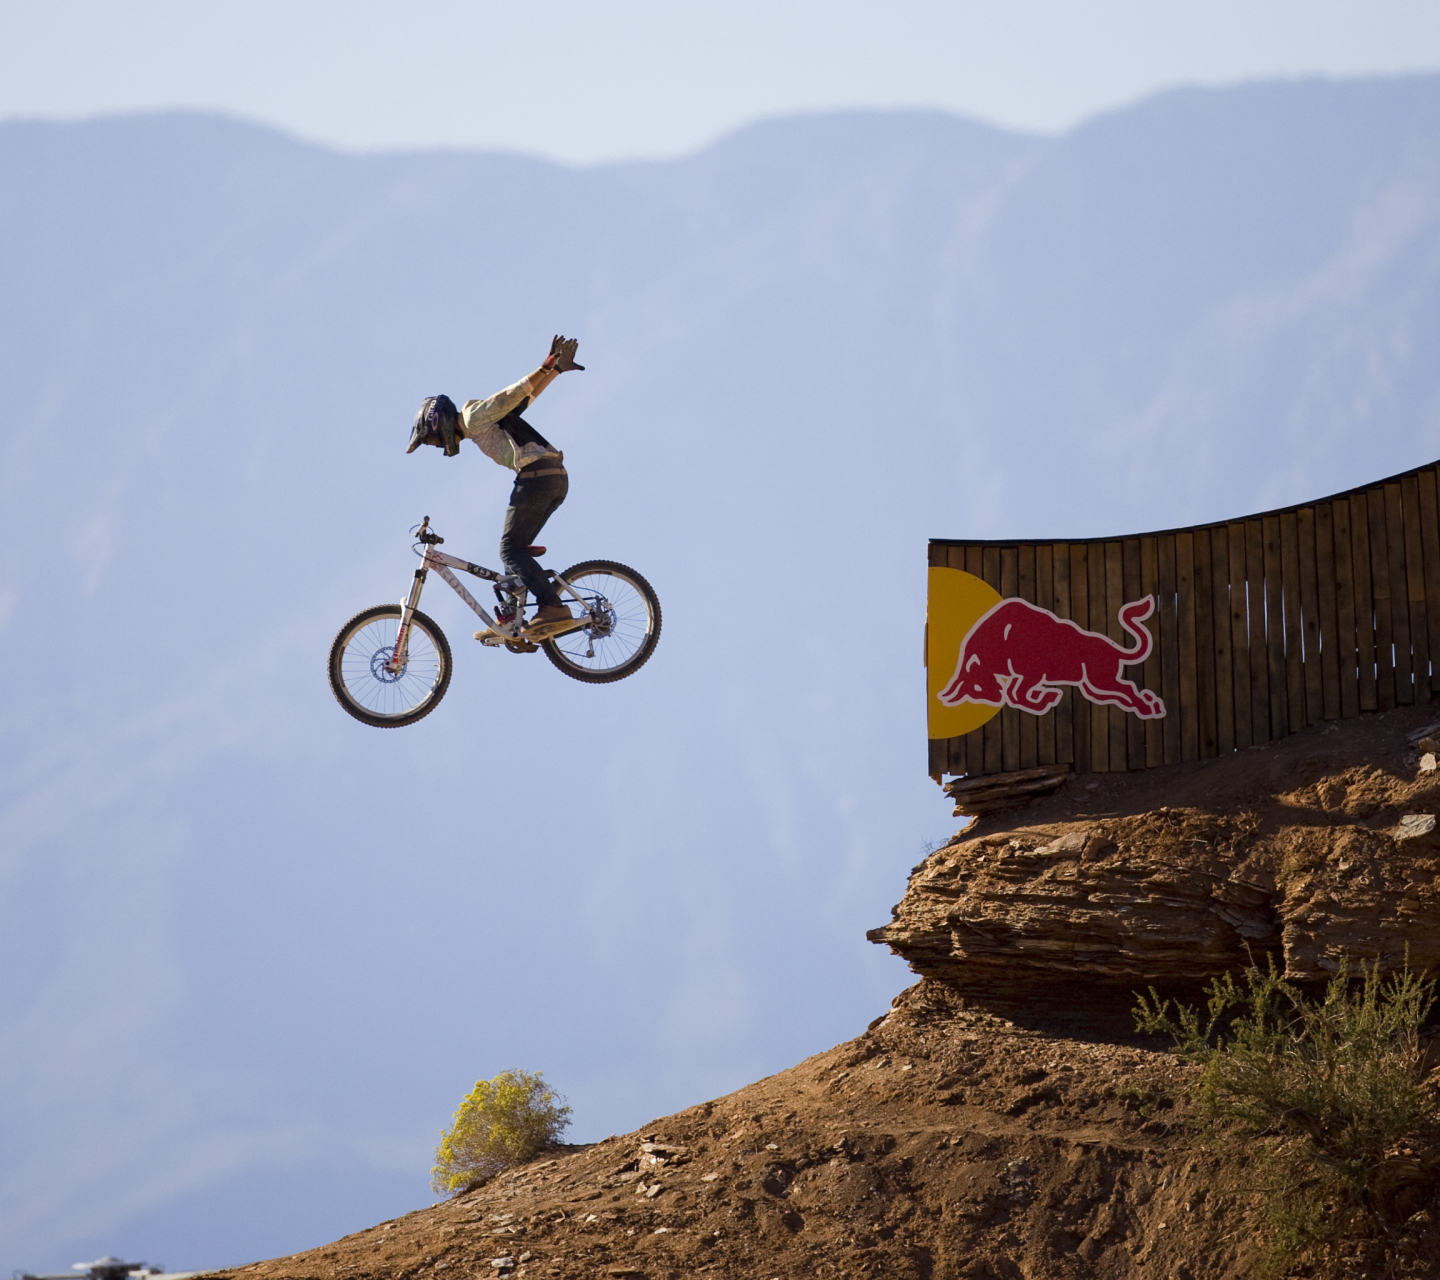 Red Bull Extreme Bicyclist wallpaper 1440x1280